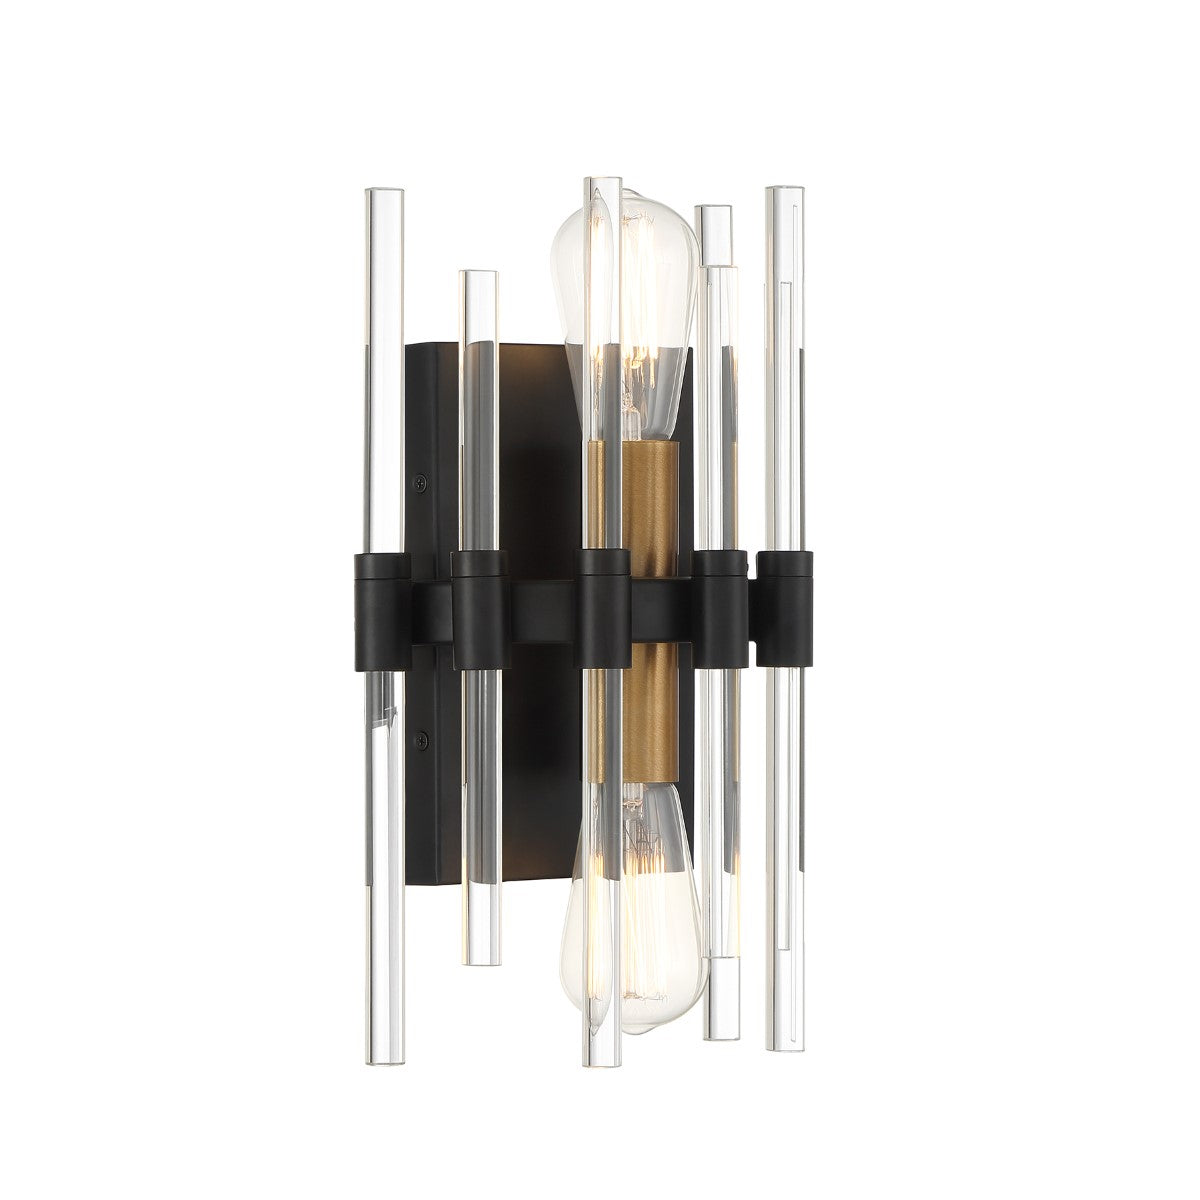 Santiago 13 in. 2 Lights Flush Mount Sconce Matte Black with Warm Brass Accents Finish